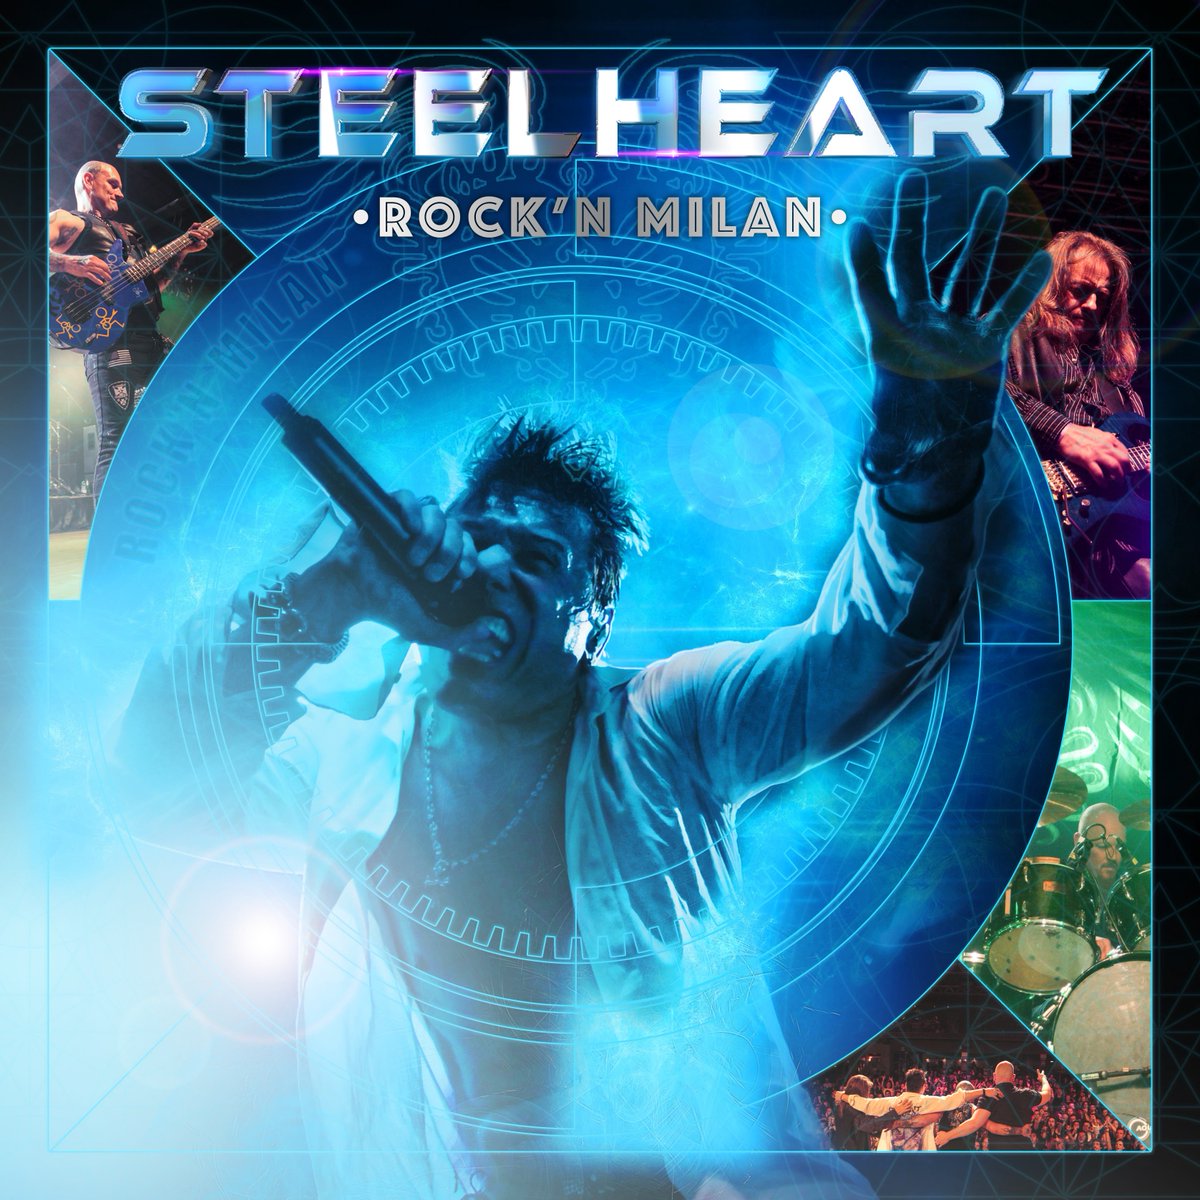 WILLTOROCK NEWS... @STEELHEARTBAND 's“Rock’n Milan” to be released Dec. 7, 2018 via @FrontiersMusic1 Featuring the final performance from guitarist, Kenny Kanowski willtorock.com/news-steelhear… #WillToRock #MusicNews #News #Steelheart #KennyKanowski #FrontiersMusic